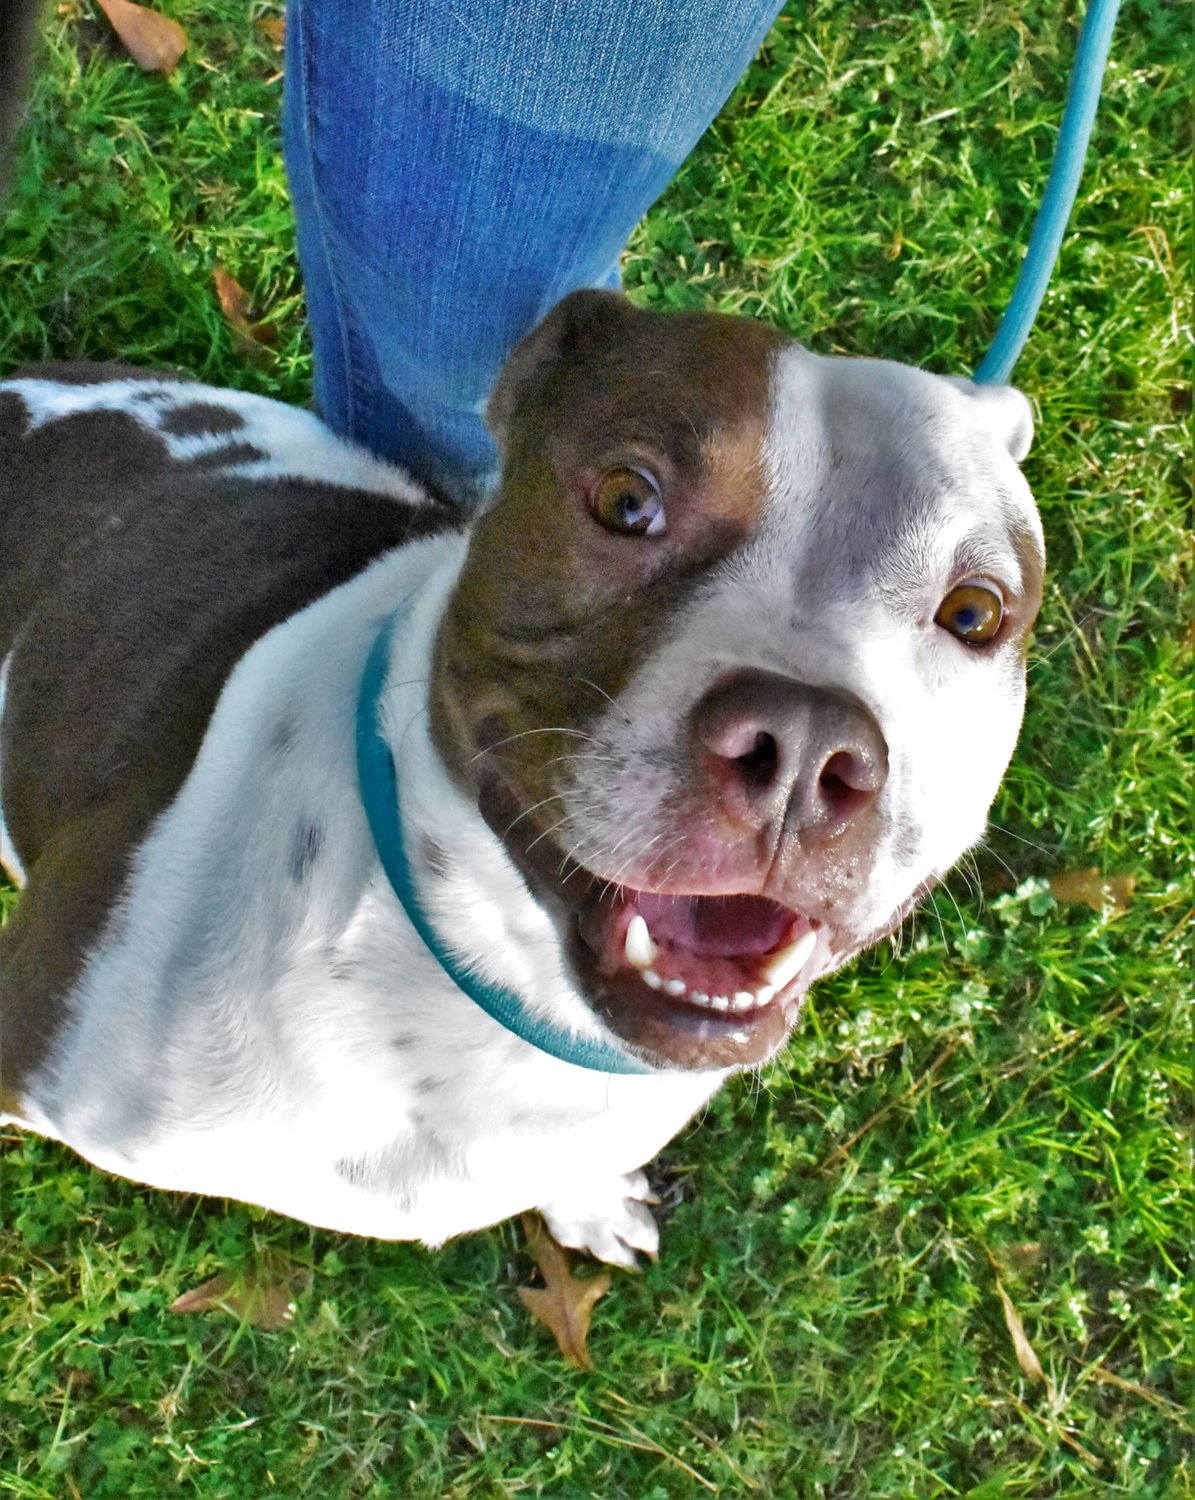 Mater is a bully mix around 2-years-old, 30 pounds and is heartworm negative. He knows how to sit, is a goof ball and loves to be loved on. Call the Baldwin County Animal Shelter to see if Mater is still available for adoption.